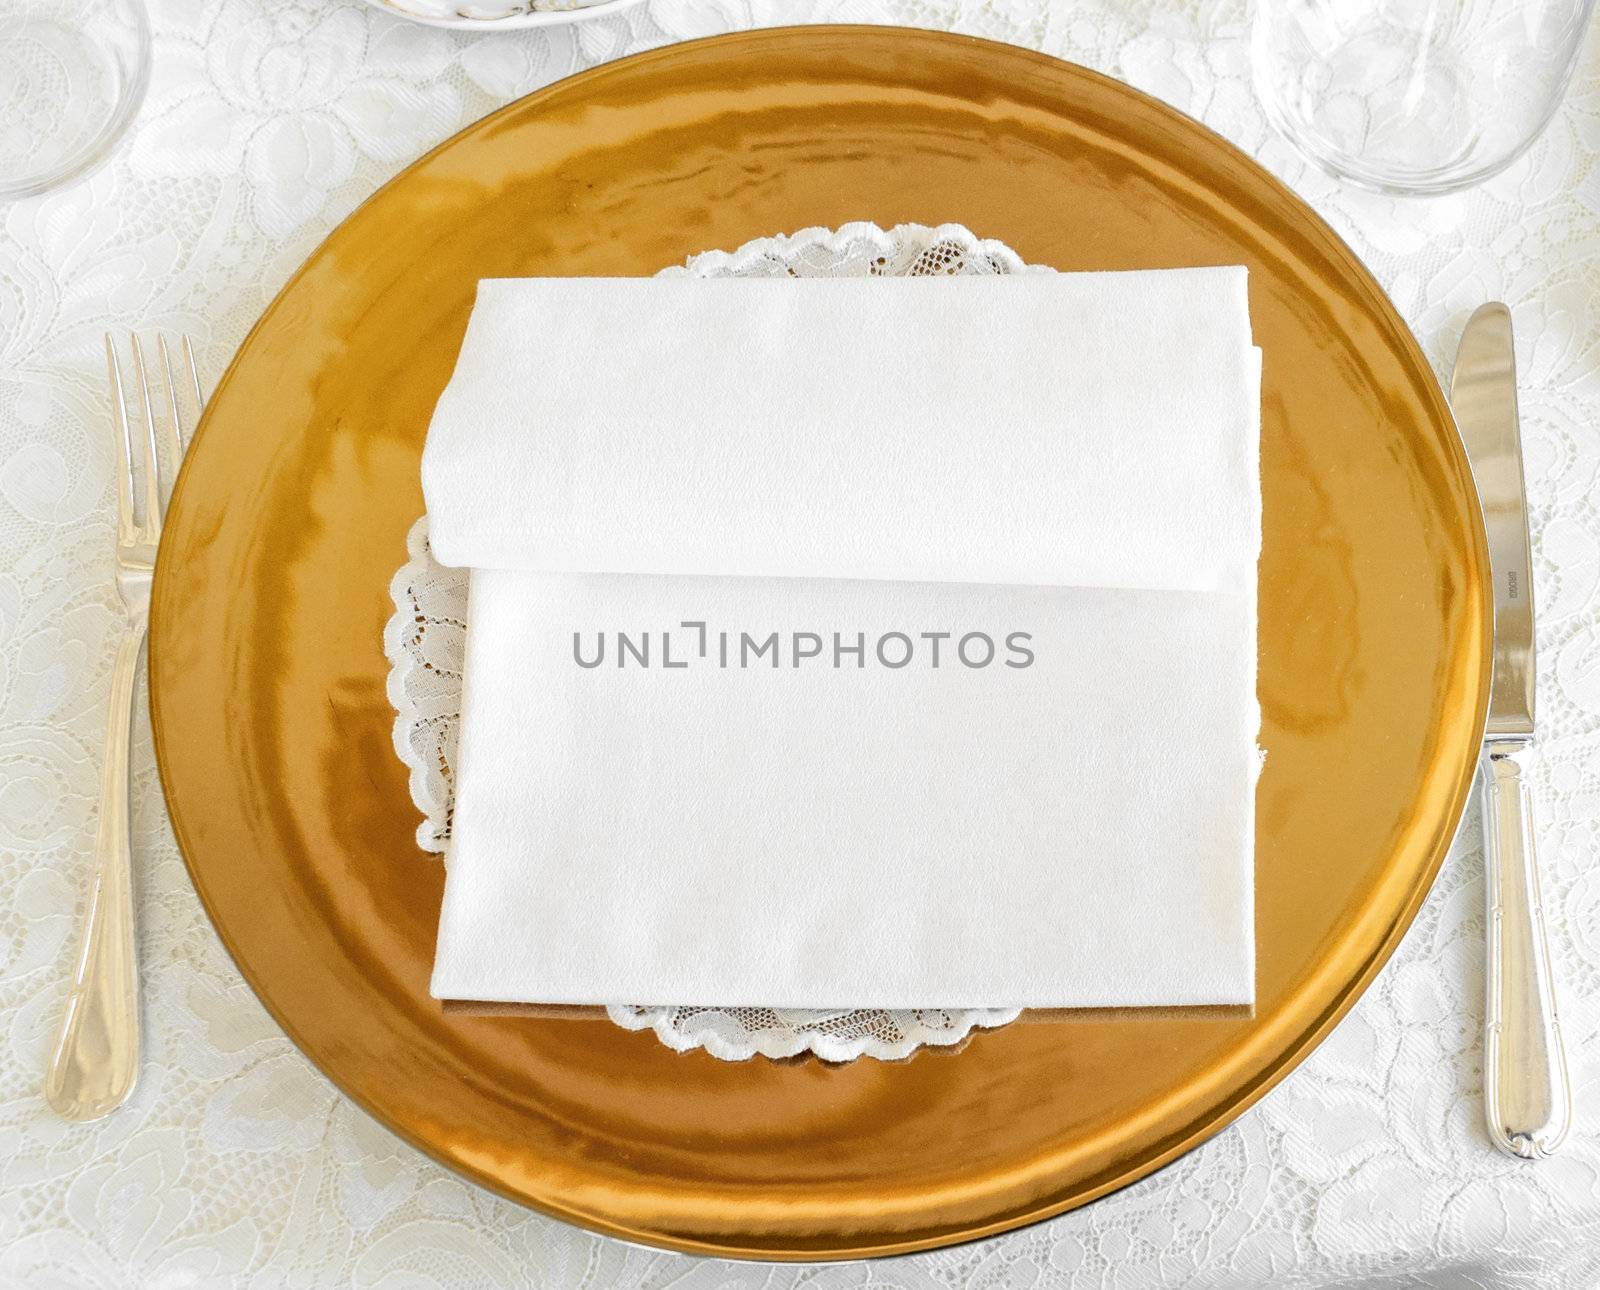 Golden plate in wedding catering with cuttlery and white napkin